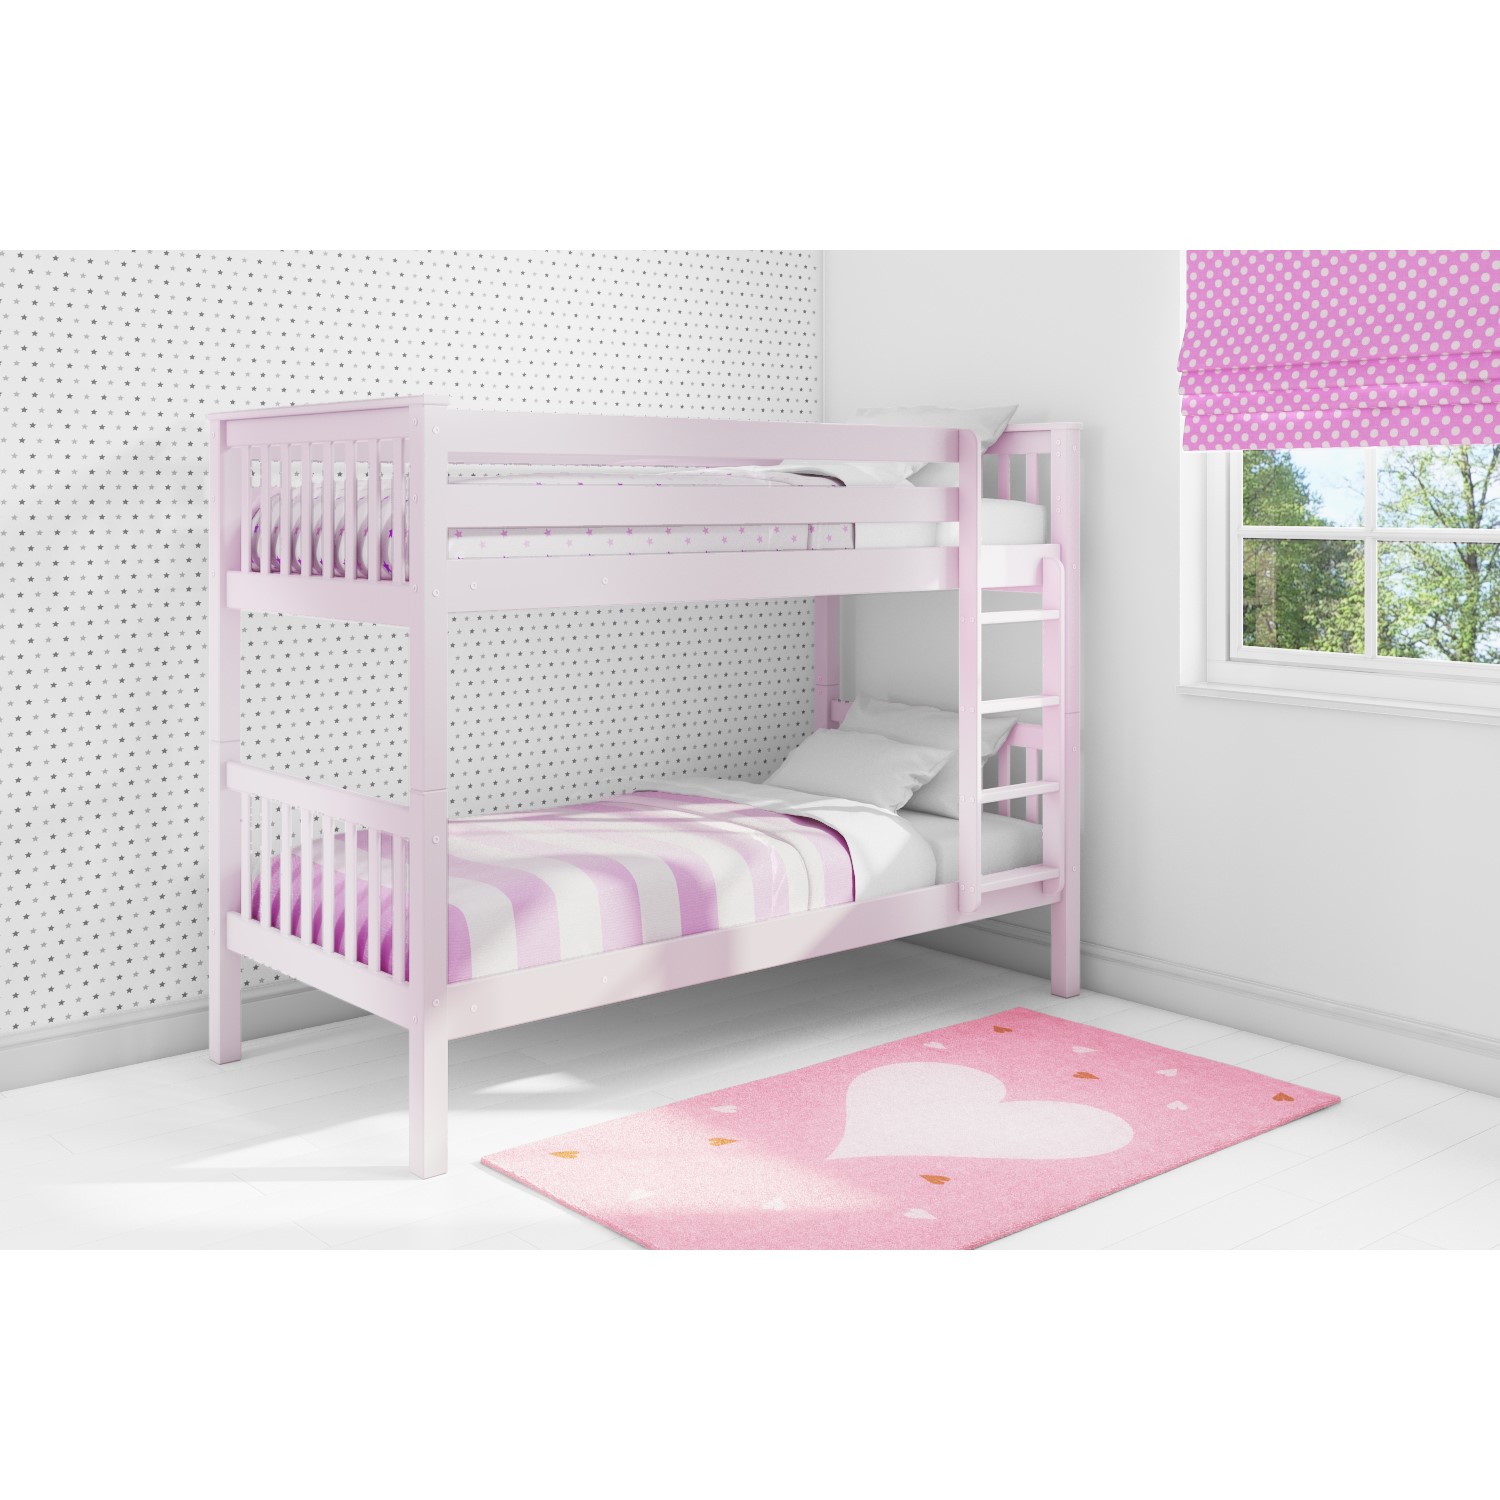 Oxford Single Bunk Bed In Light Pink, Hot Pink Bunk Beds